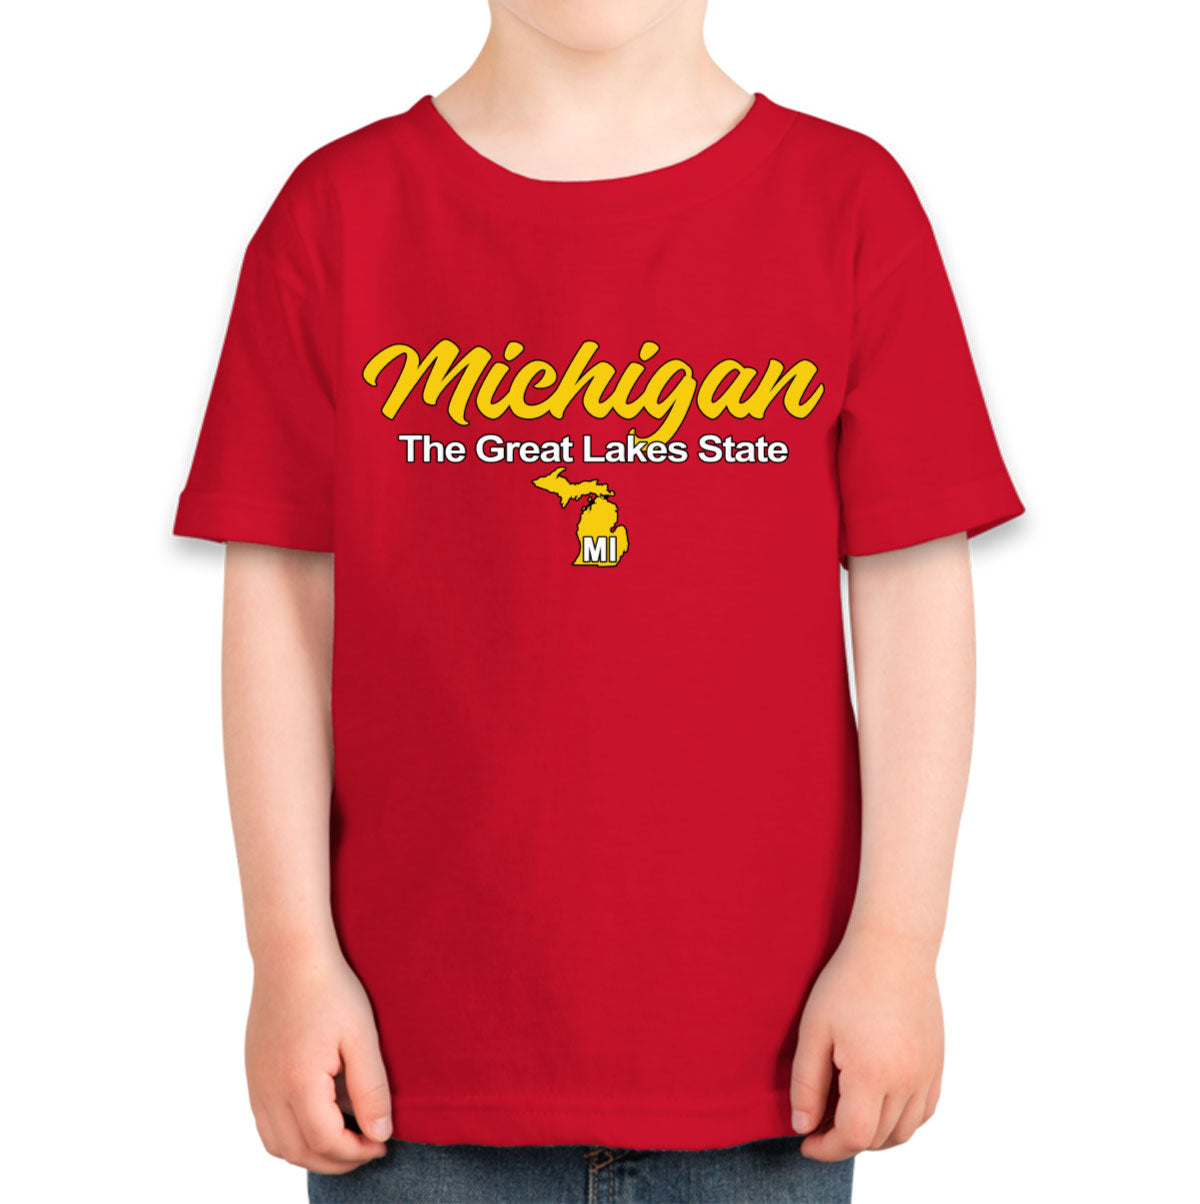 Michigan The Great Lakes State Toddler T-shirt